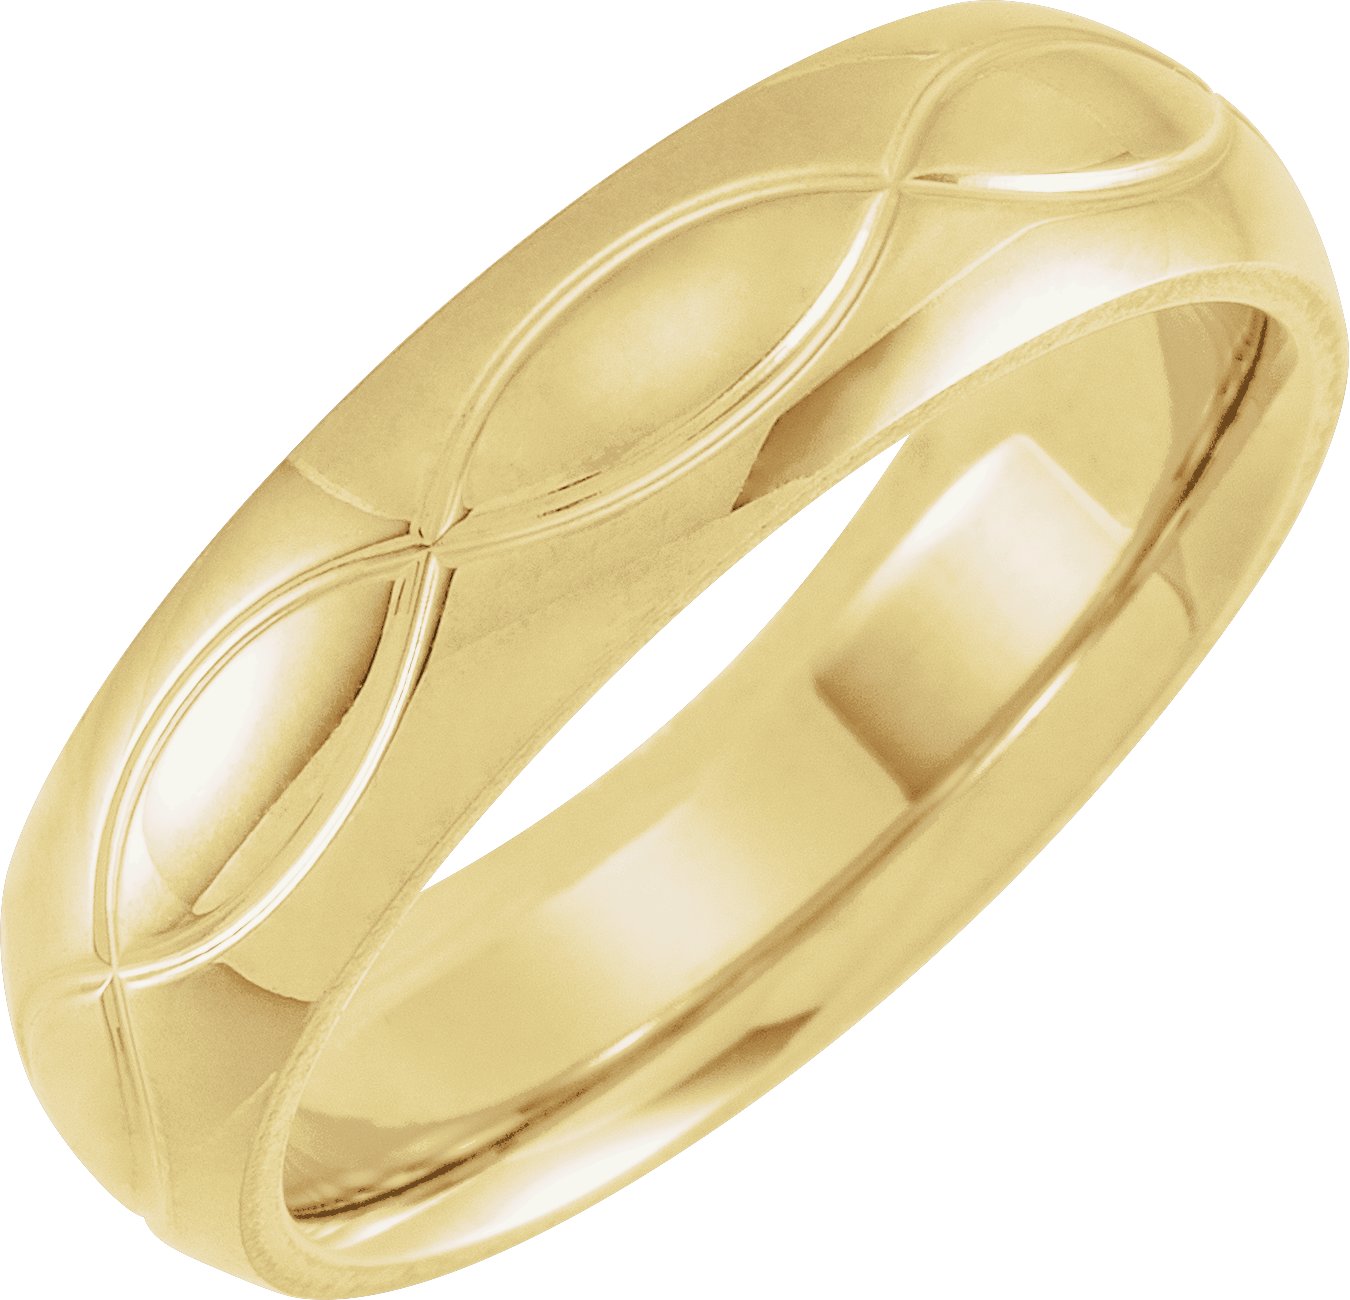 14K Yellow 6 mm Infinity Patterned Band Size 9